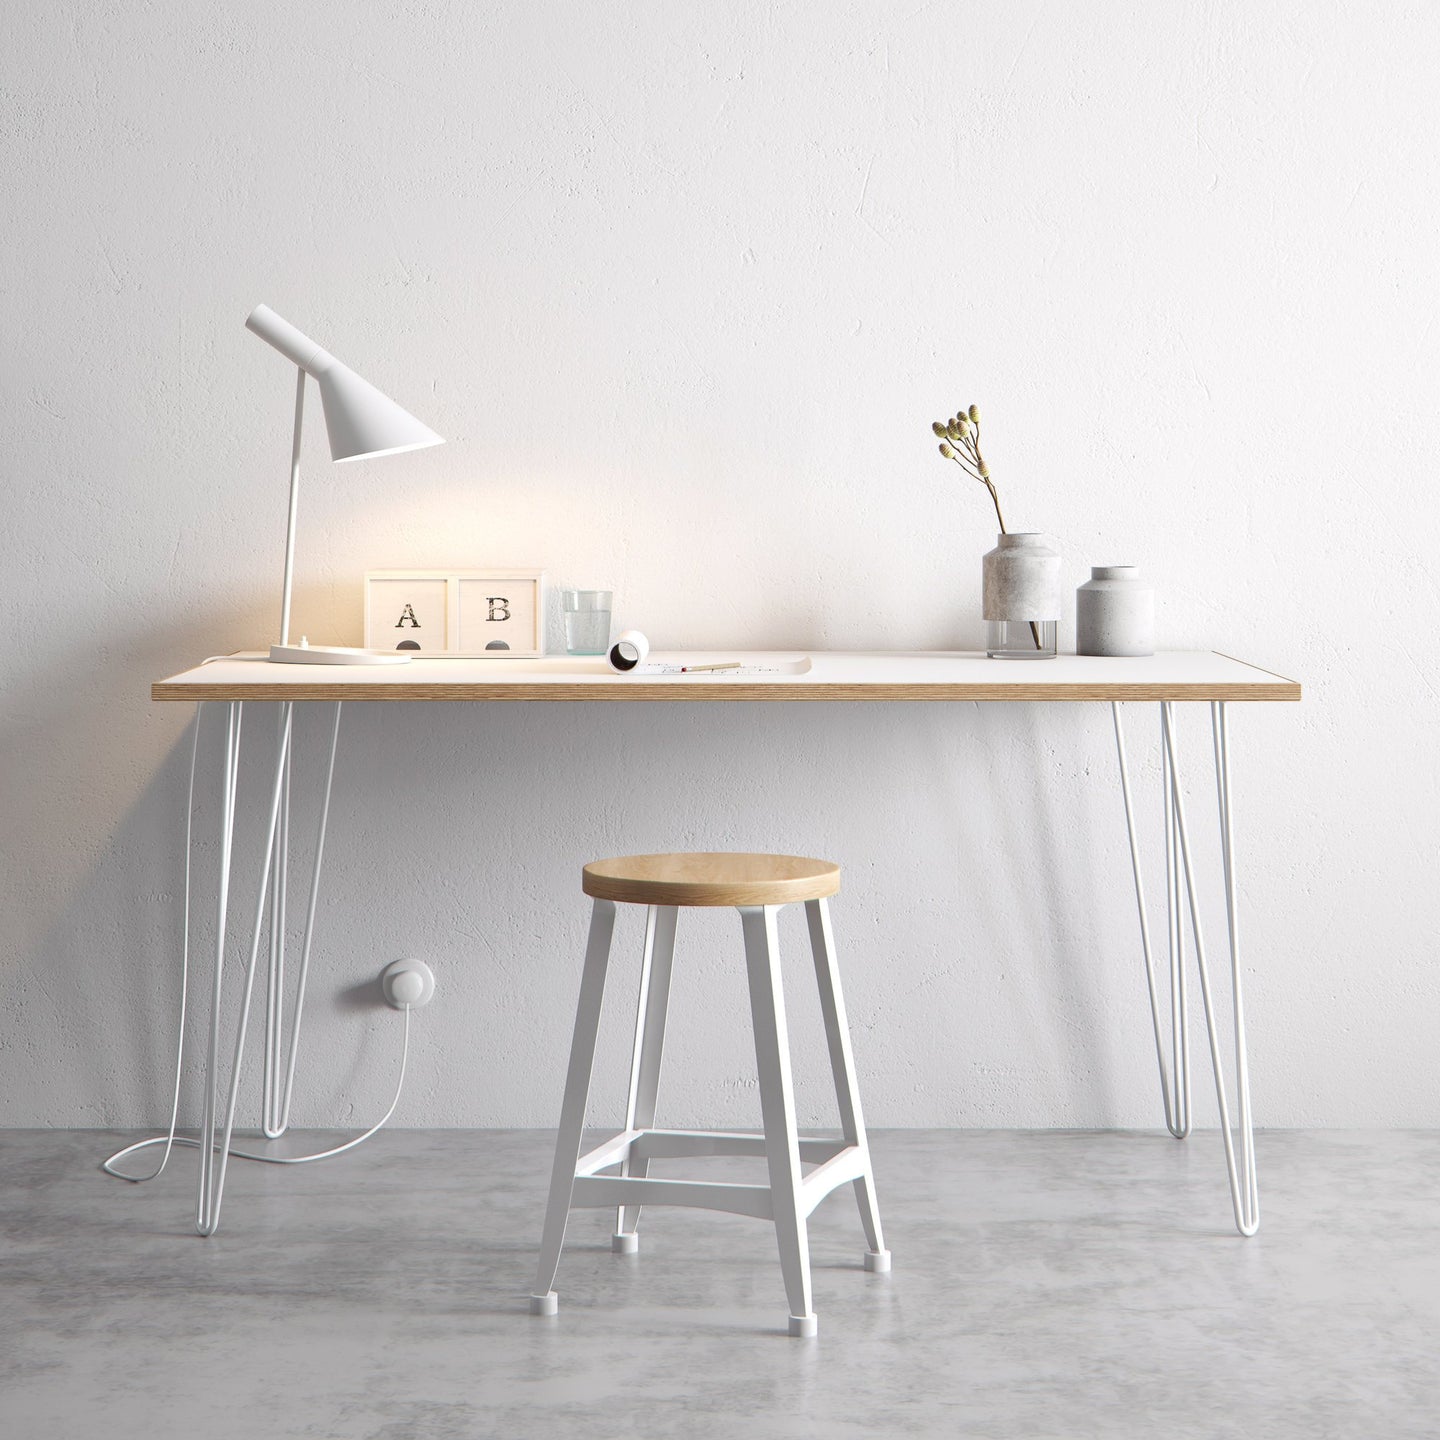 Scandinavian look white formica coated birch table completed with hairpin legs